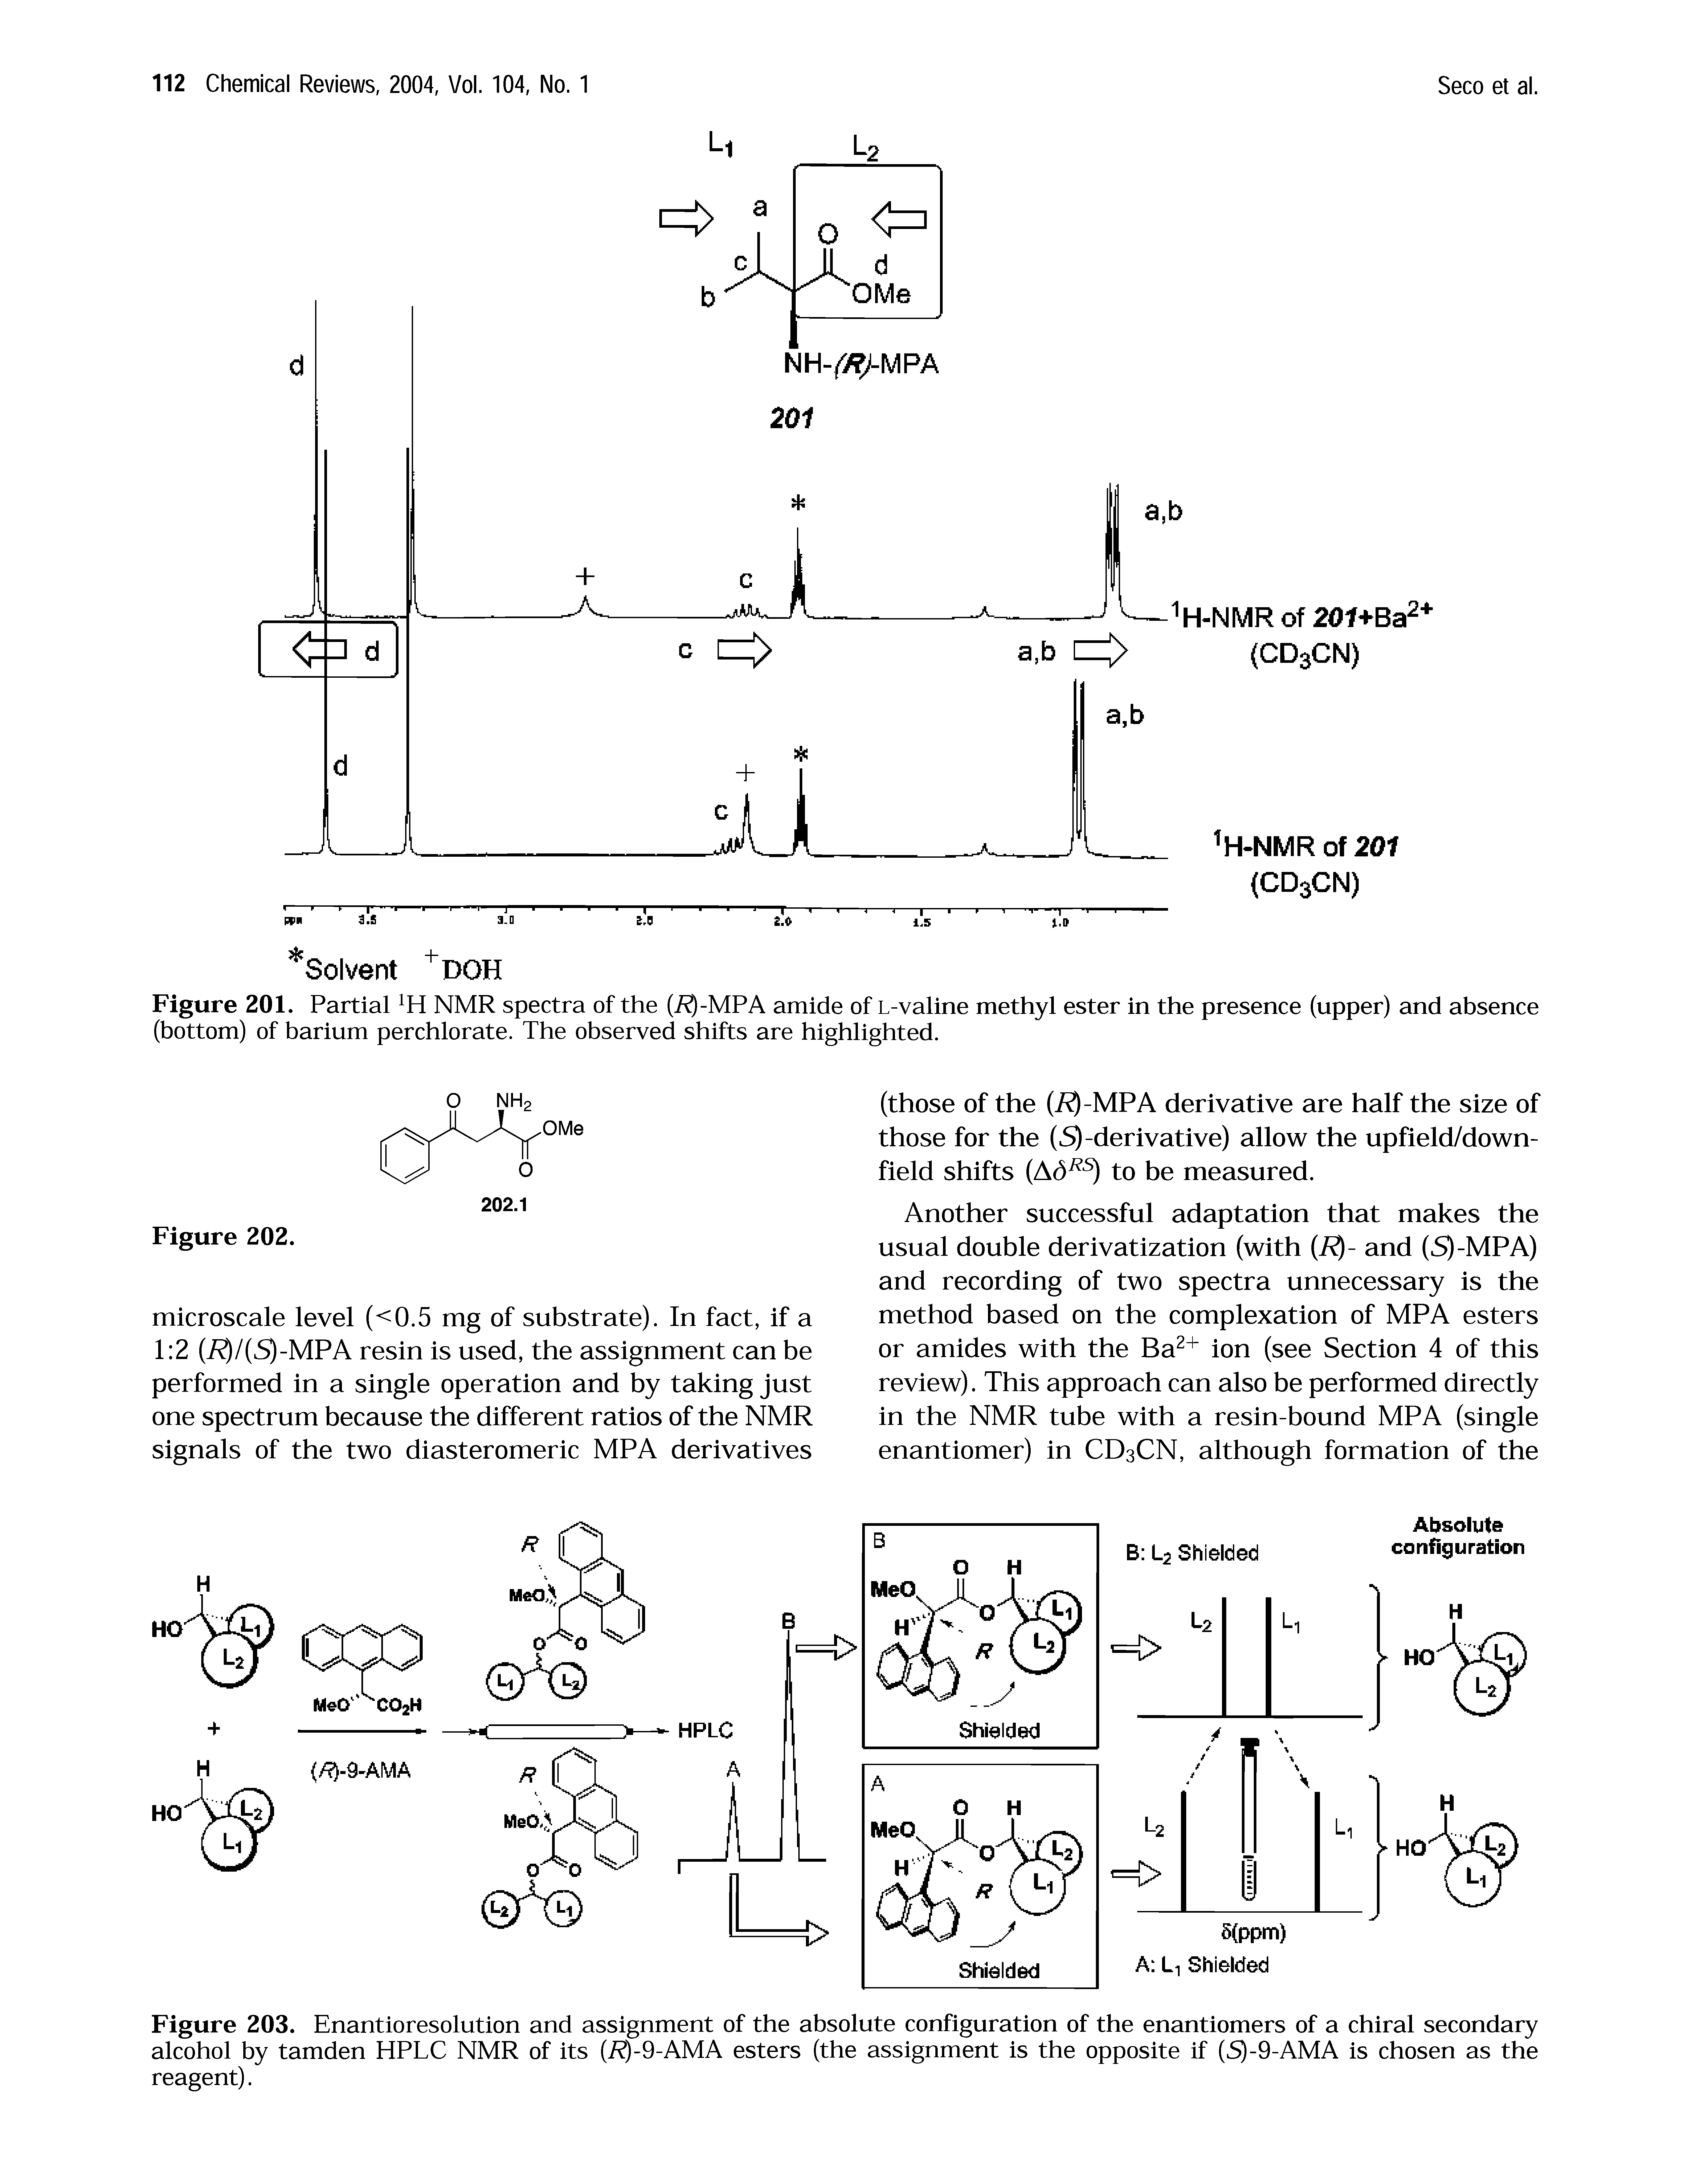 Figure 203. Enantioresolution and assignment of the absolute configuration of the enantiomers of a chiral secondary alcohol by tamden HPLC NMR of its (i )-9-AMA esters (the assignment is the opposite if (5)-9-AMA is chosen as the reagent).